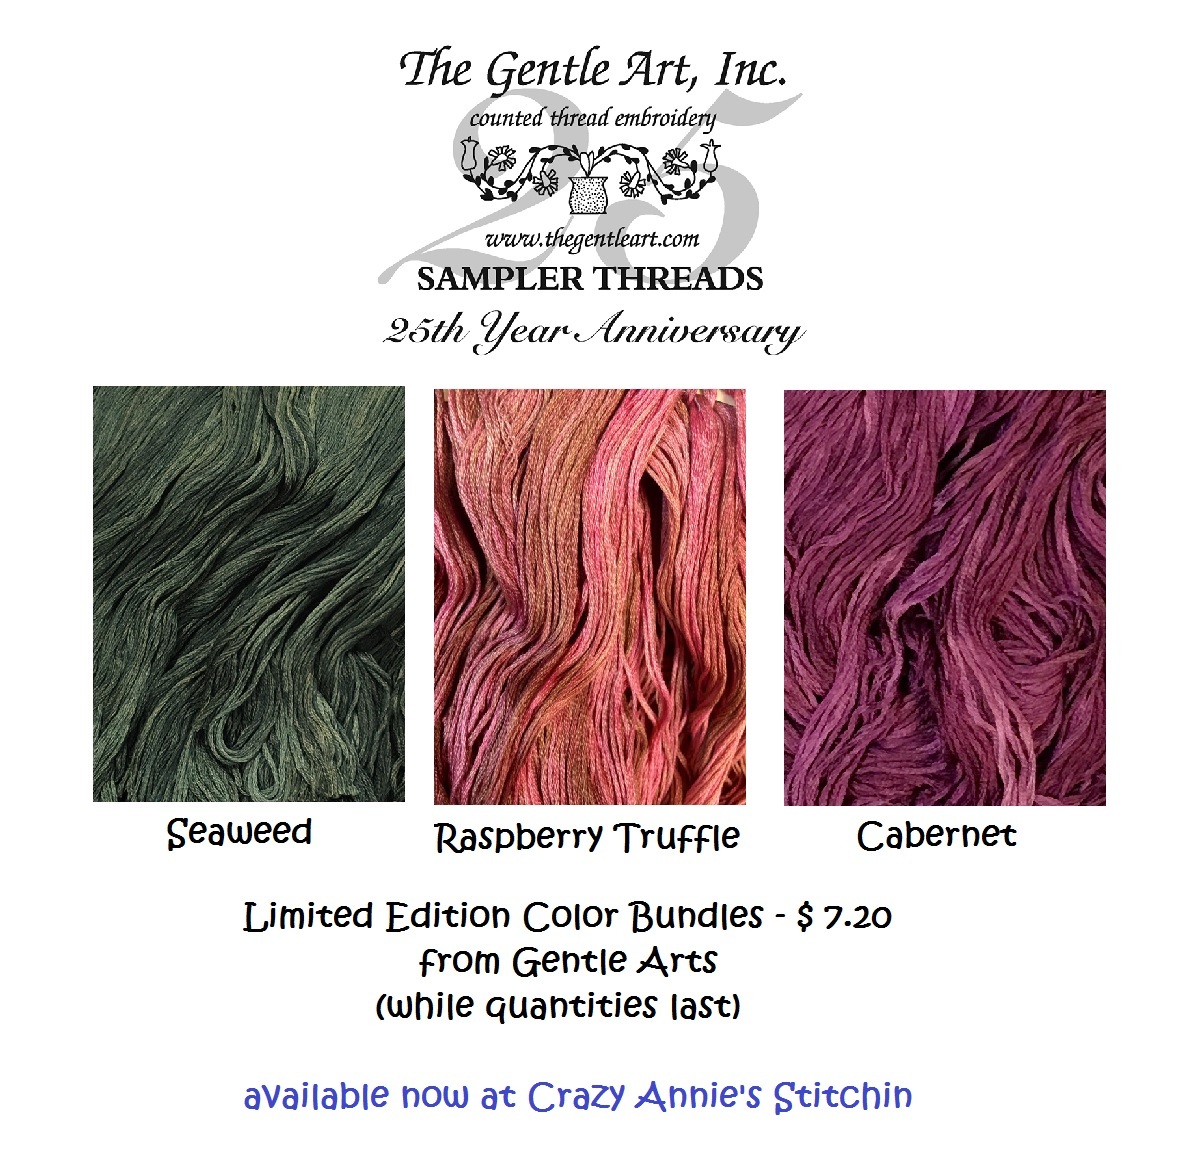 **NEW** LIMITED EDITION BUNDLE GAST Floss 3 skeins cross stitch The Gentle Art  - $7.20